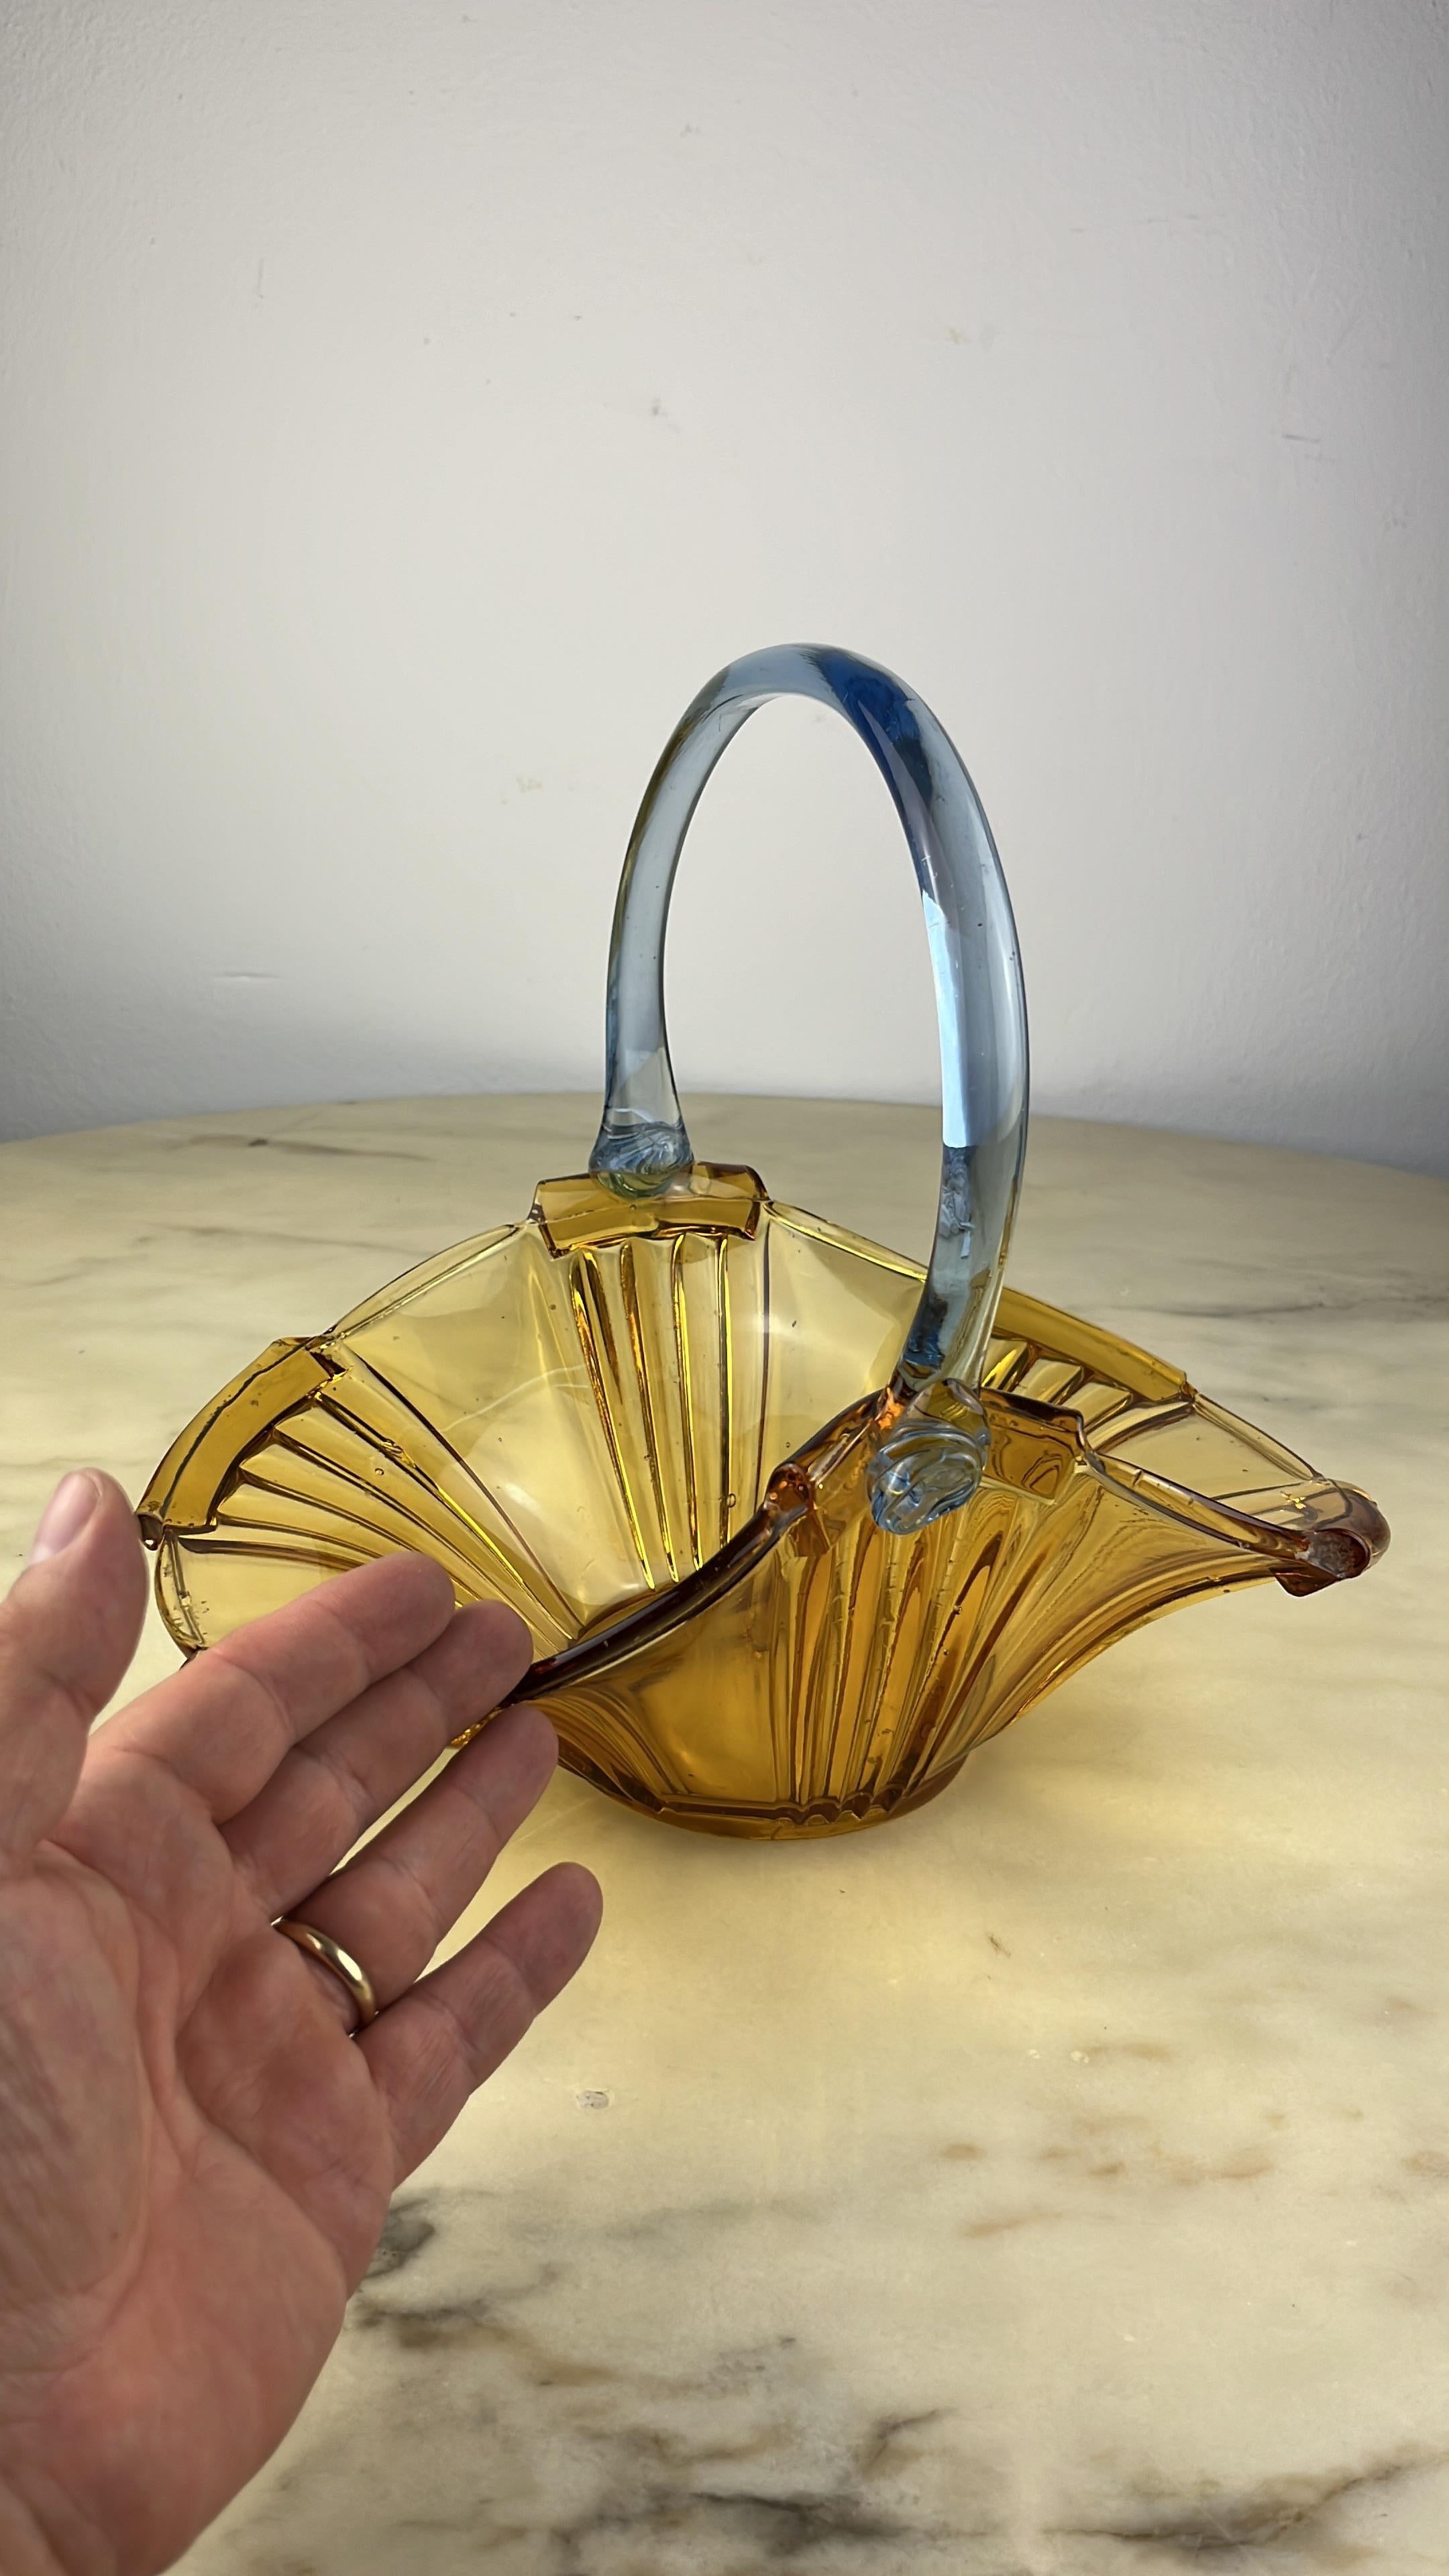 Large Murano glass basket, Italy, 1950s.
Found in a noble apartment. Purchased in Murano in the 1950s. Intact. It can be used as a flower basket or fruit basket. Small signs of the time.